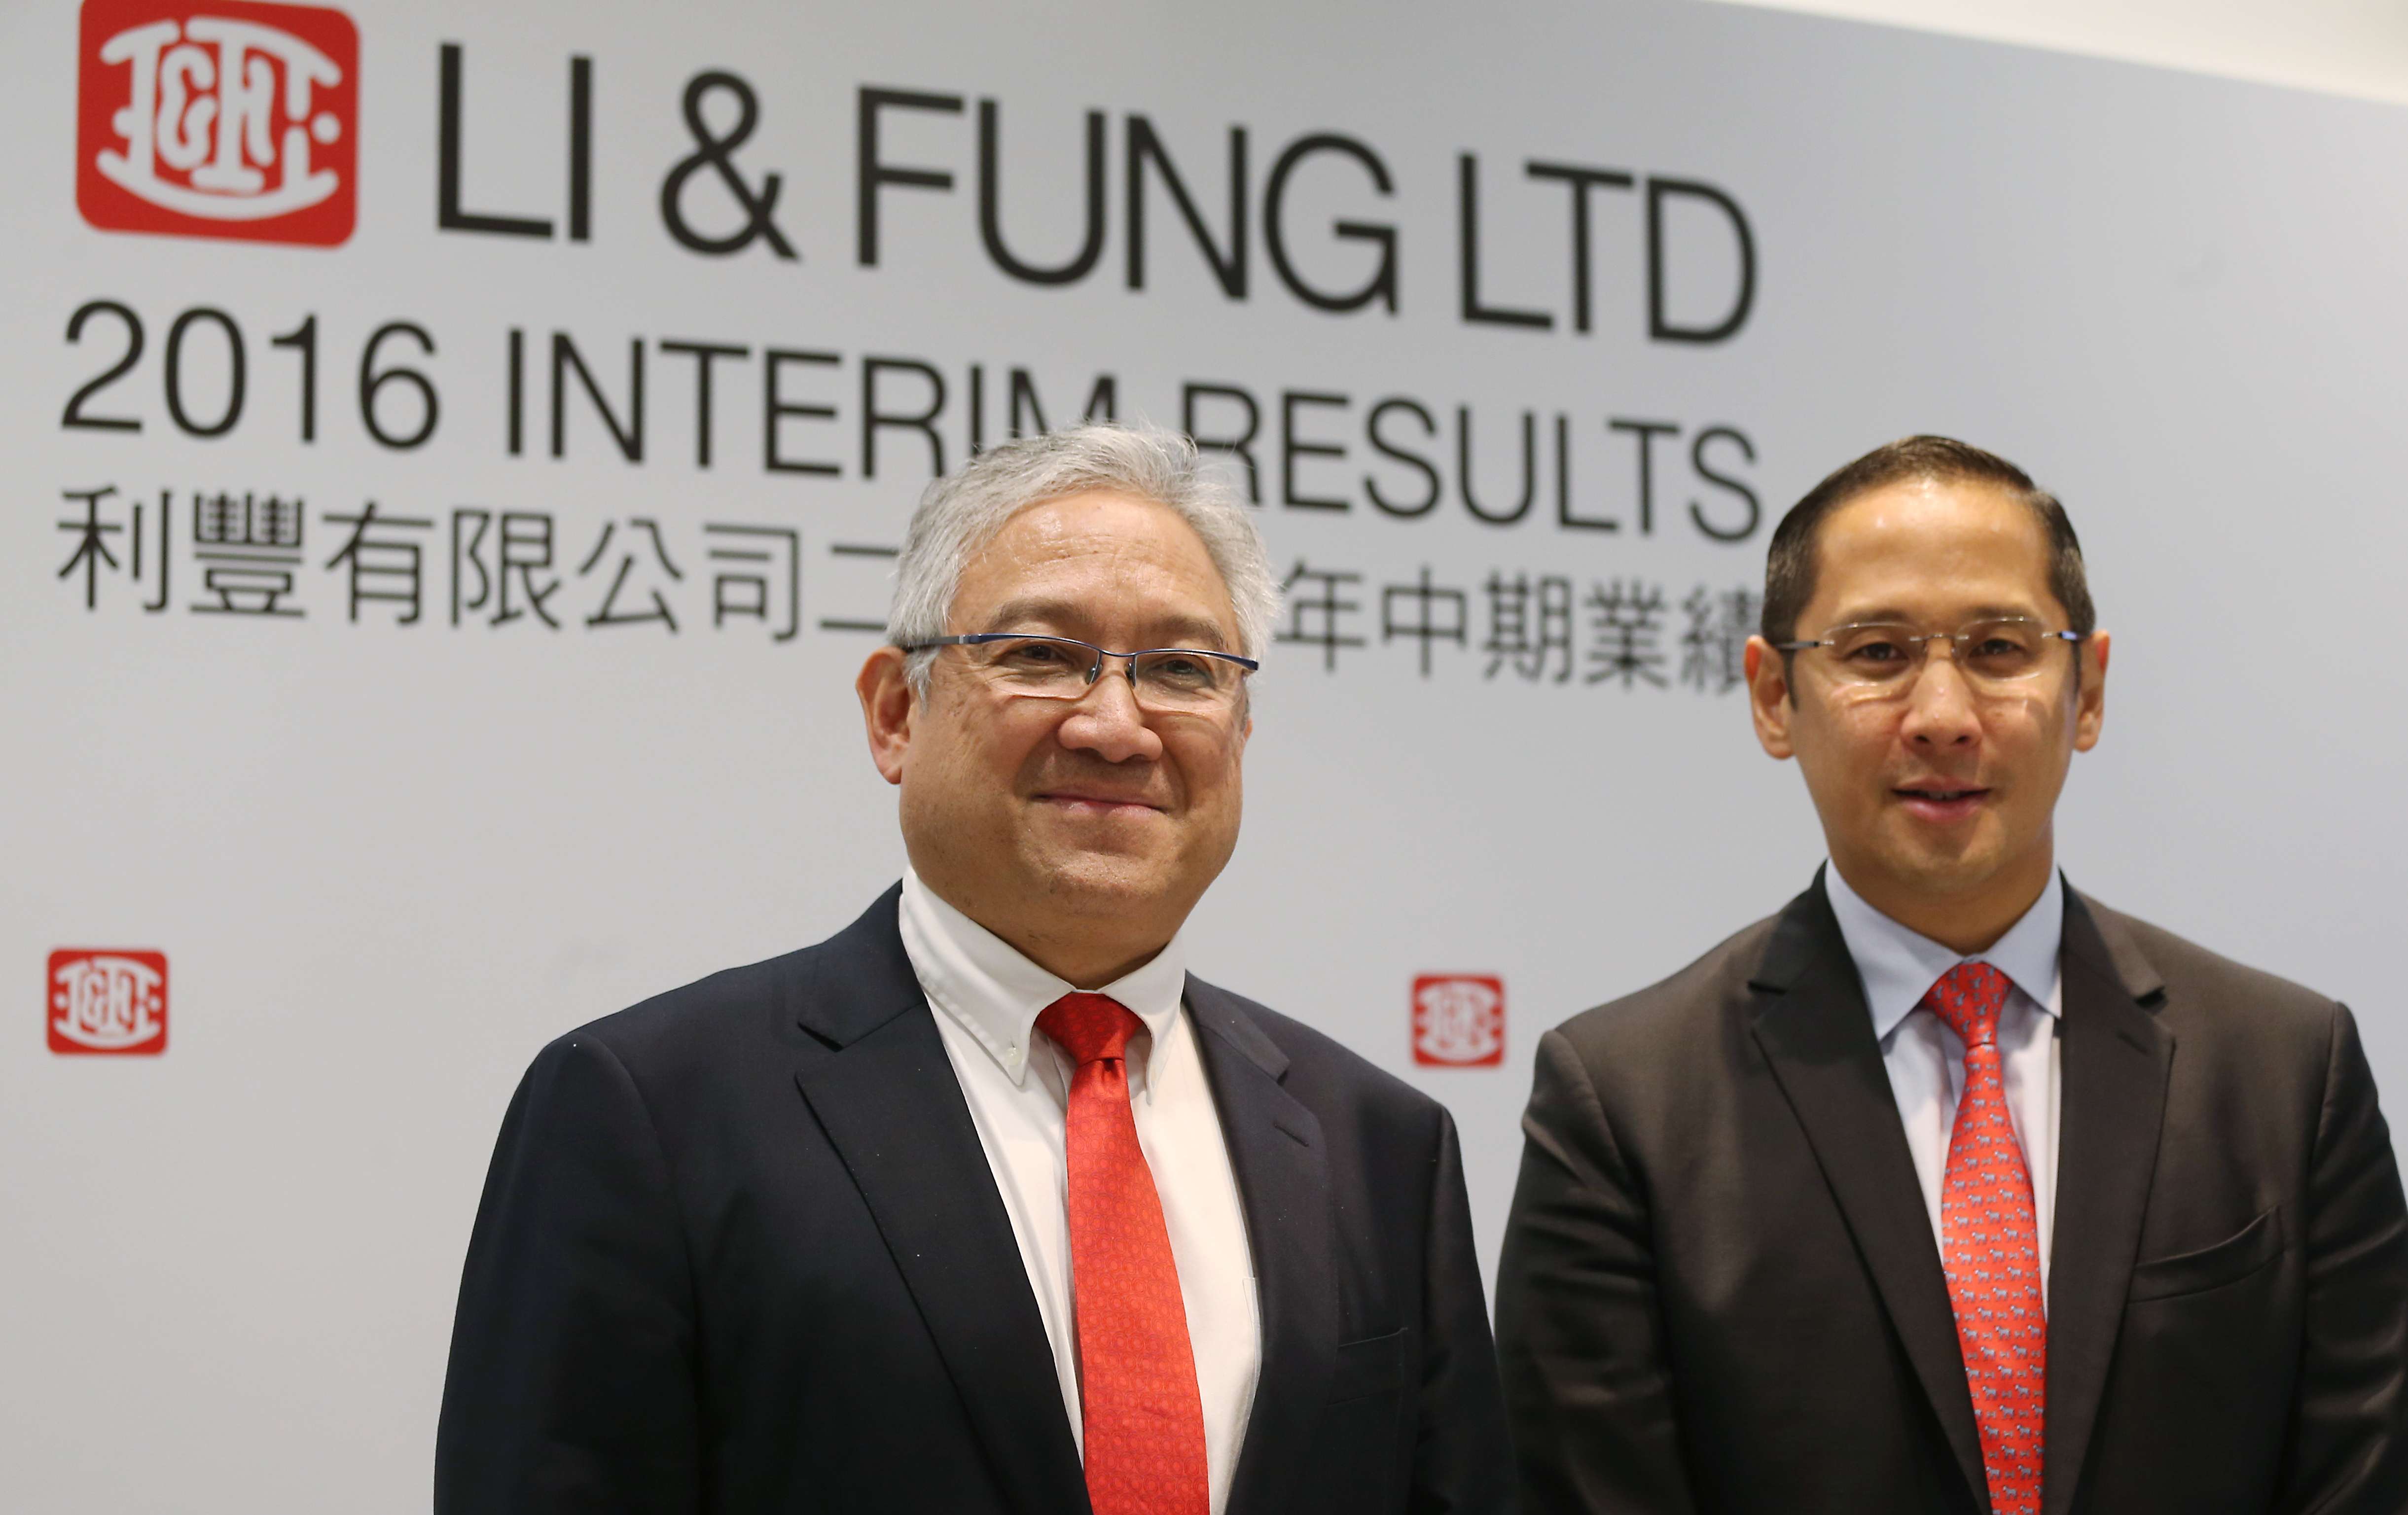 Li and Fung Group chairman William Fung Kwok-lun (Left) and CEO Spencer Fung. Founded more than 100 years ago, the Fung family have steadily built the company into one of the world’s largest global supply chain firms. Photo: K. Y. Cheng